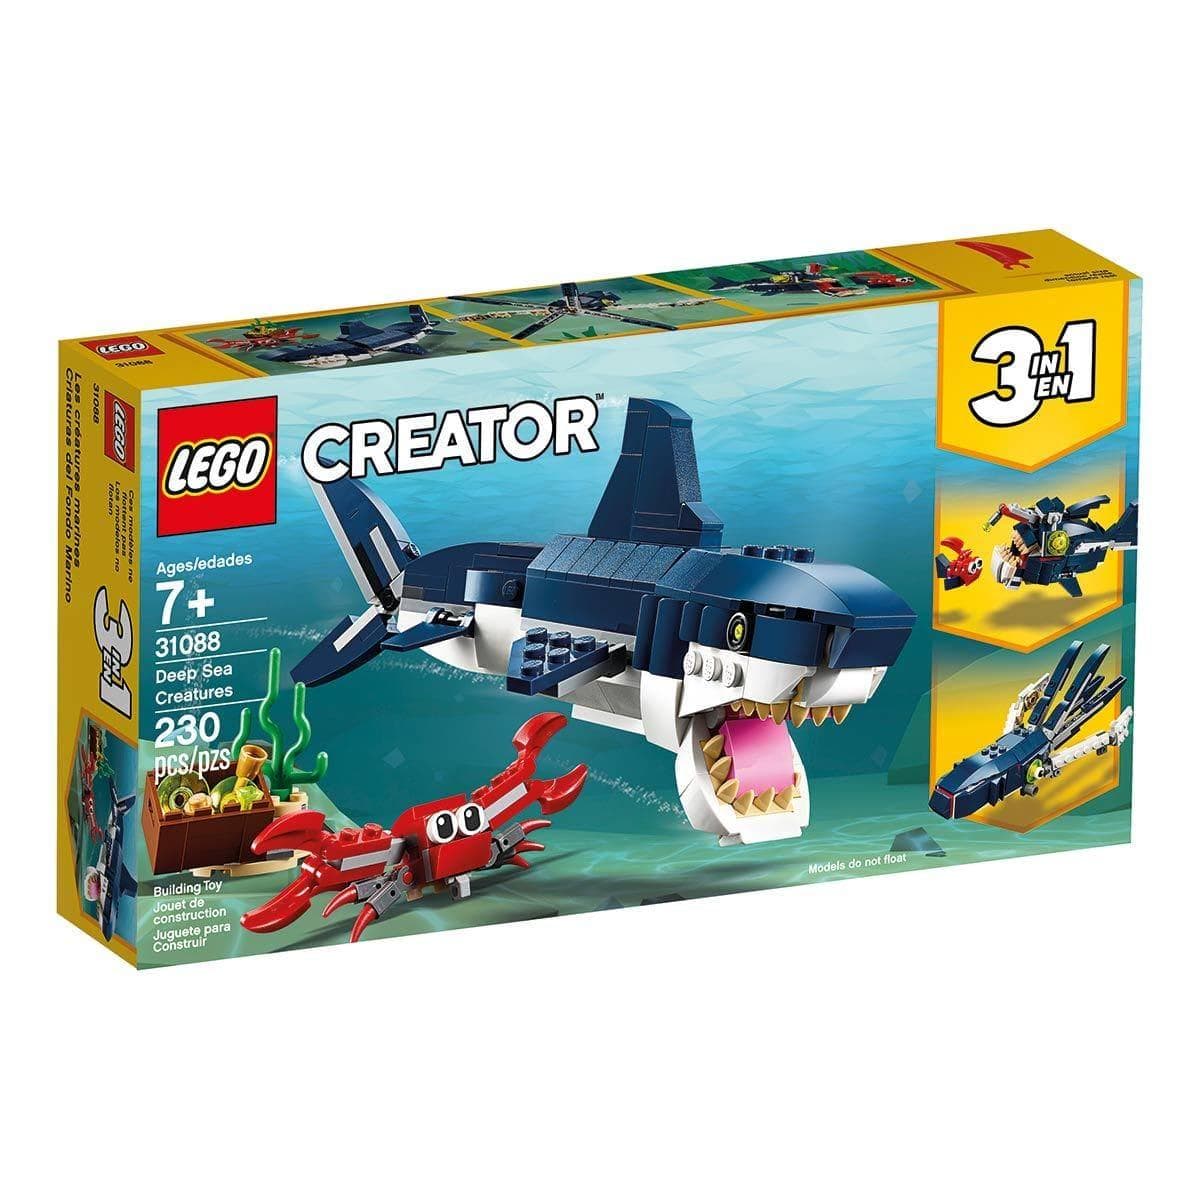 Buy Games Deep Sea Creatures, Lego Creator sold at Party Expert